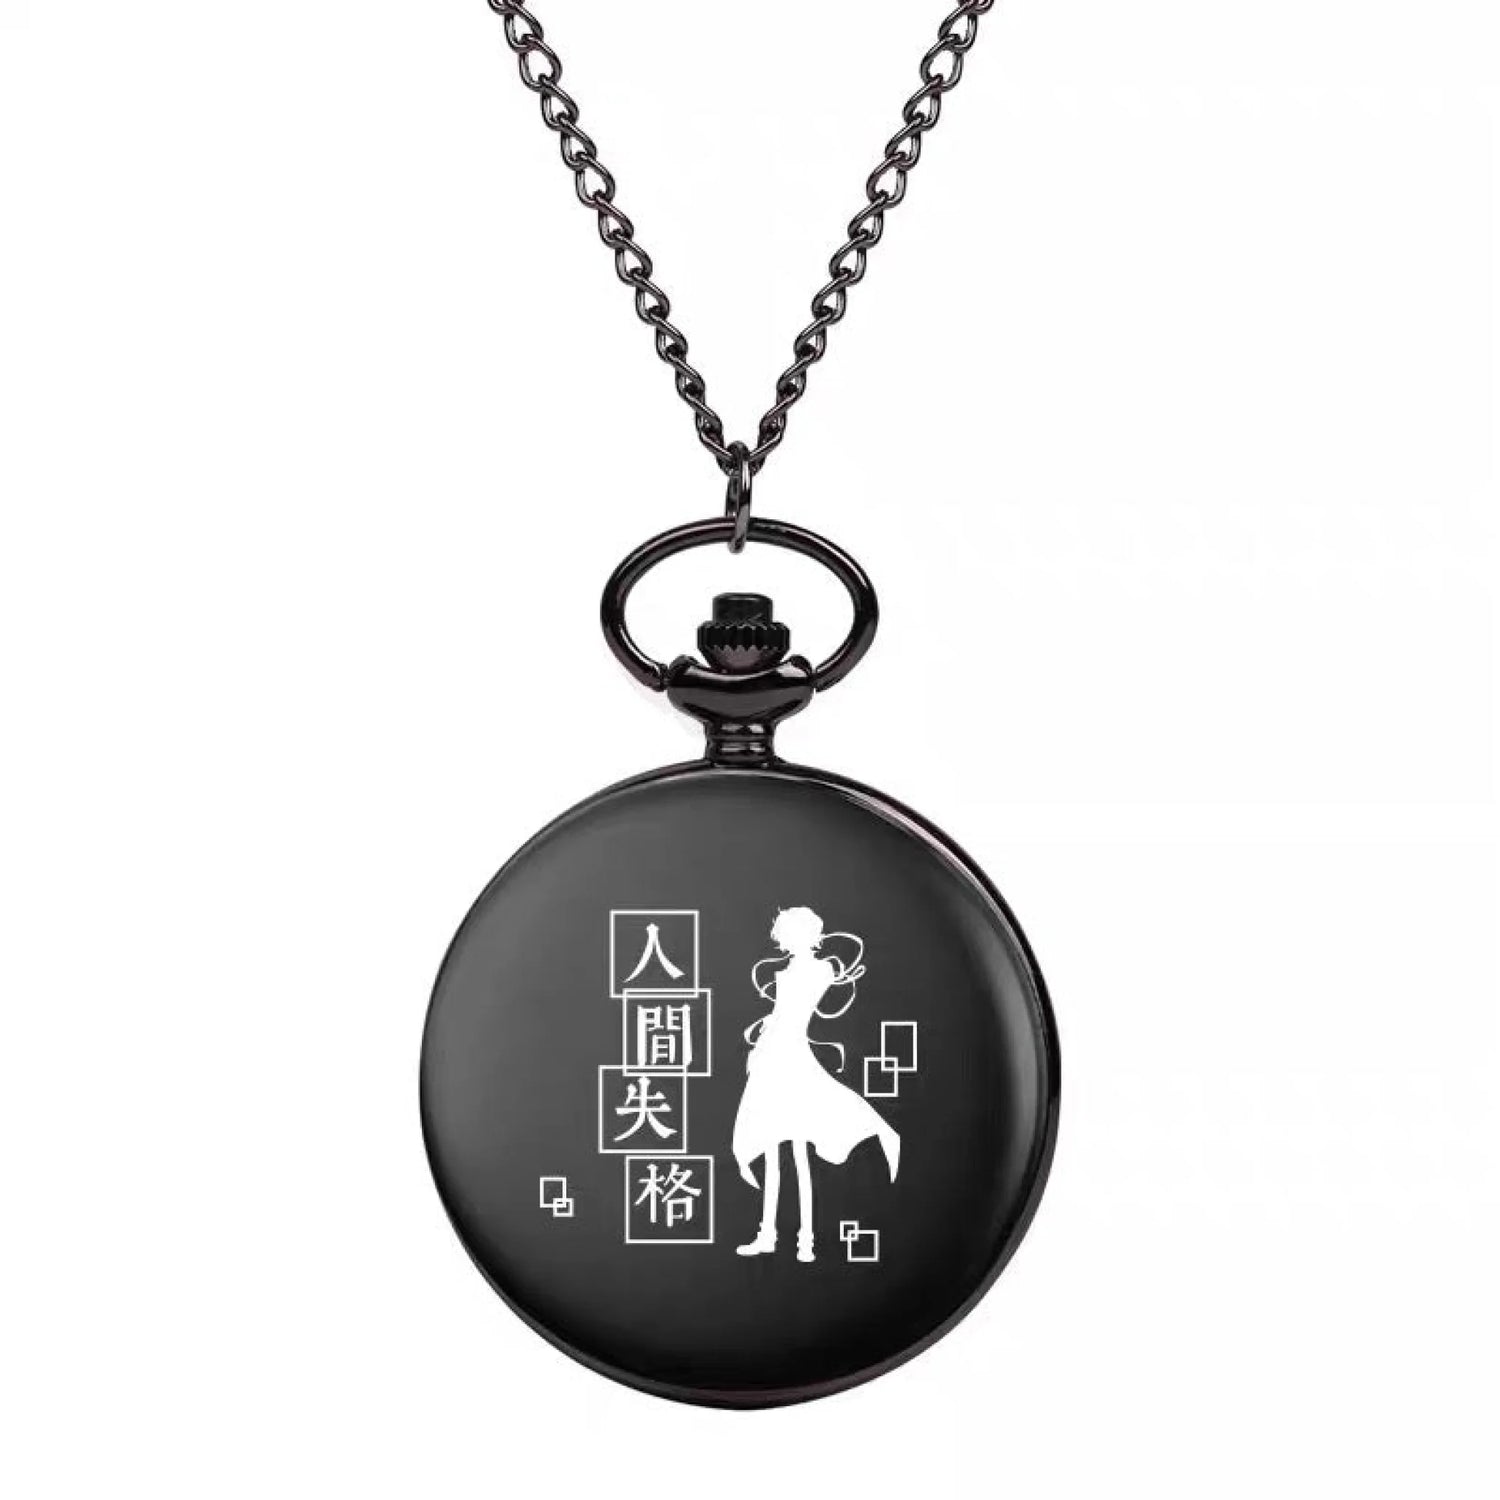 Bungo Stray Dogs Characters Theme Pocket Watch Necklace 怀表